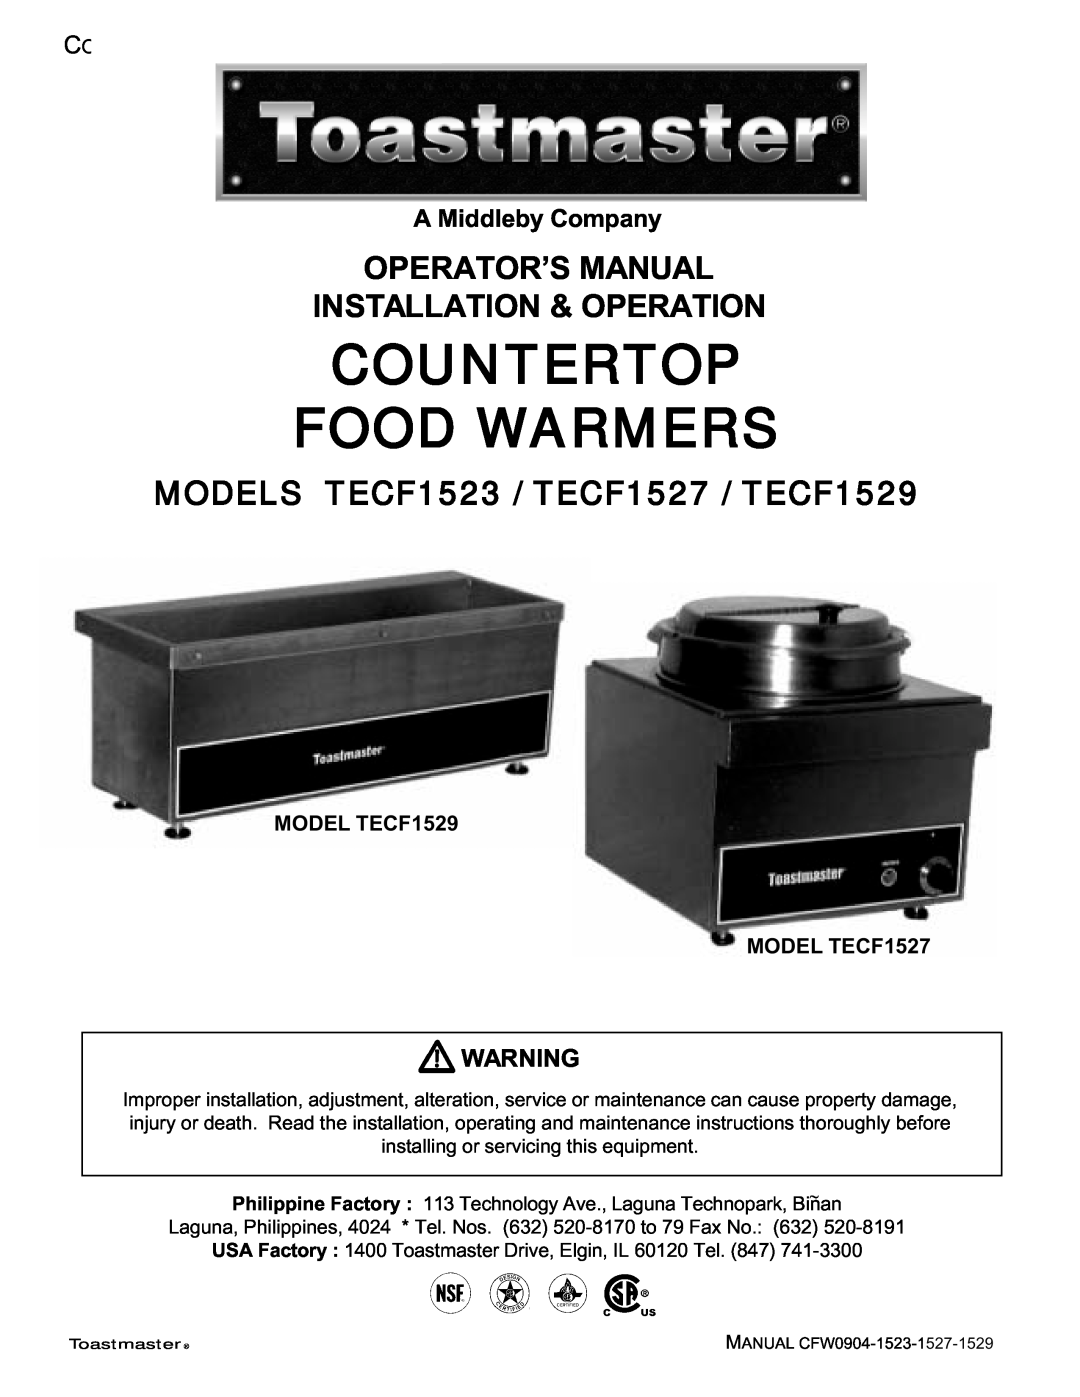 Toastmaster TECF1529, TECF1527 Operator’S Manual Installation & Operation, A Middleby Company, Countertop Food Warmers 